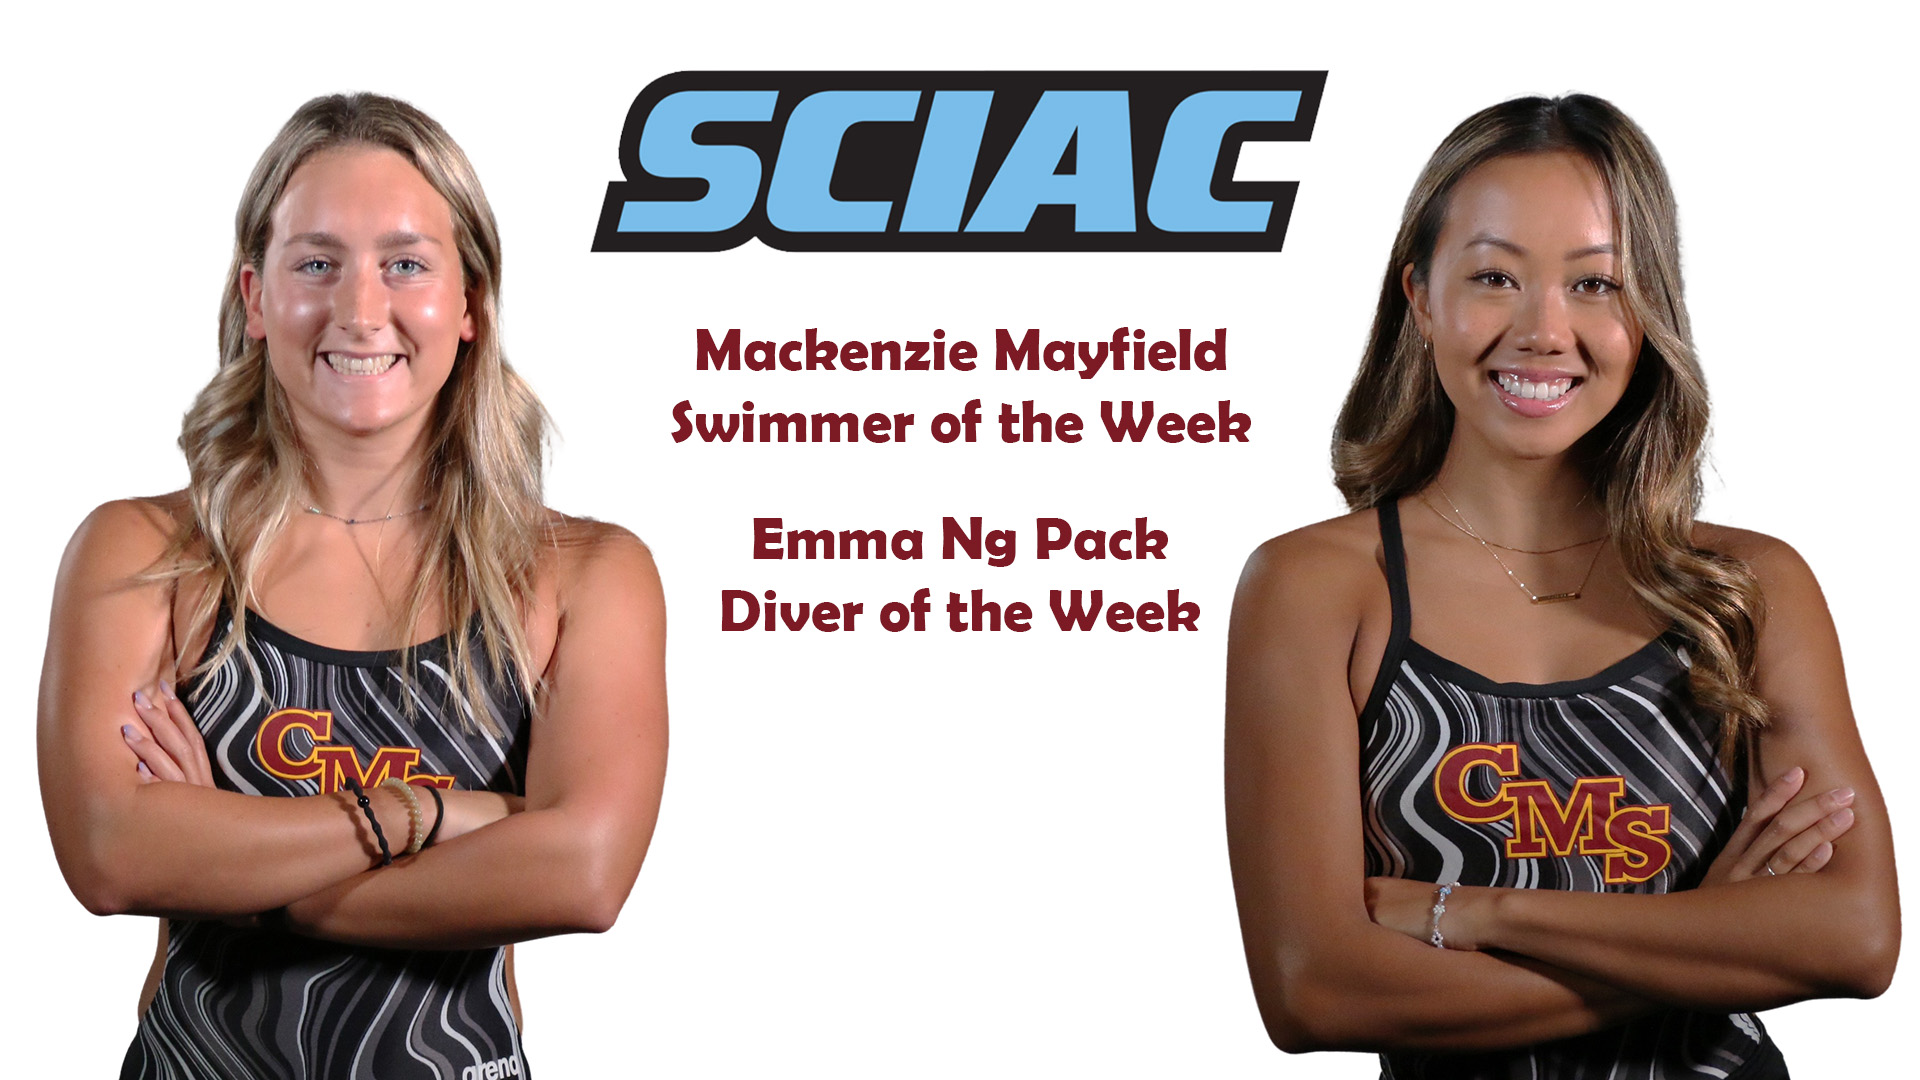 Posed shots of Mackenzie Mayfield and Emma Ng Pack with the SCIAC logo